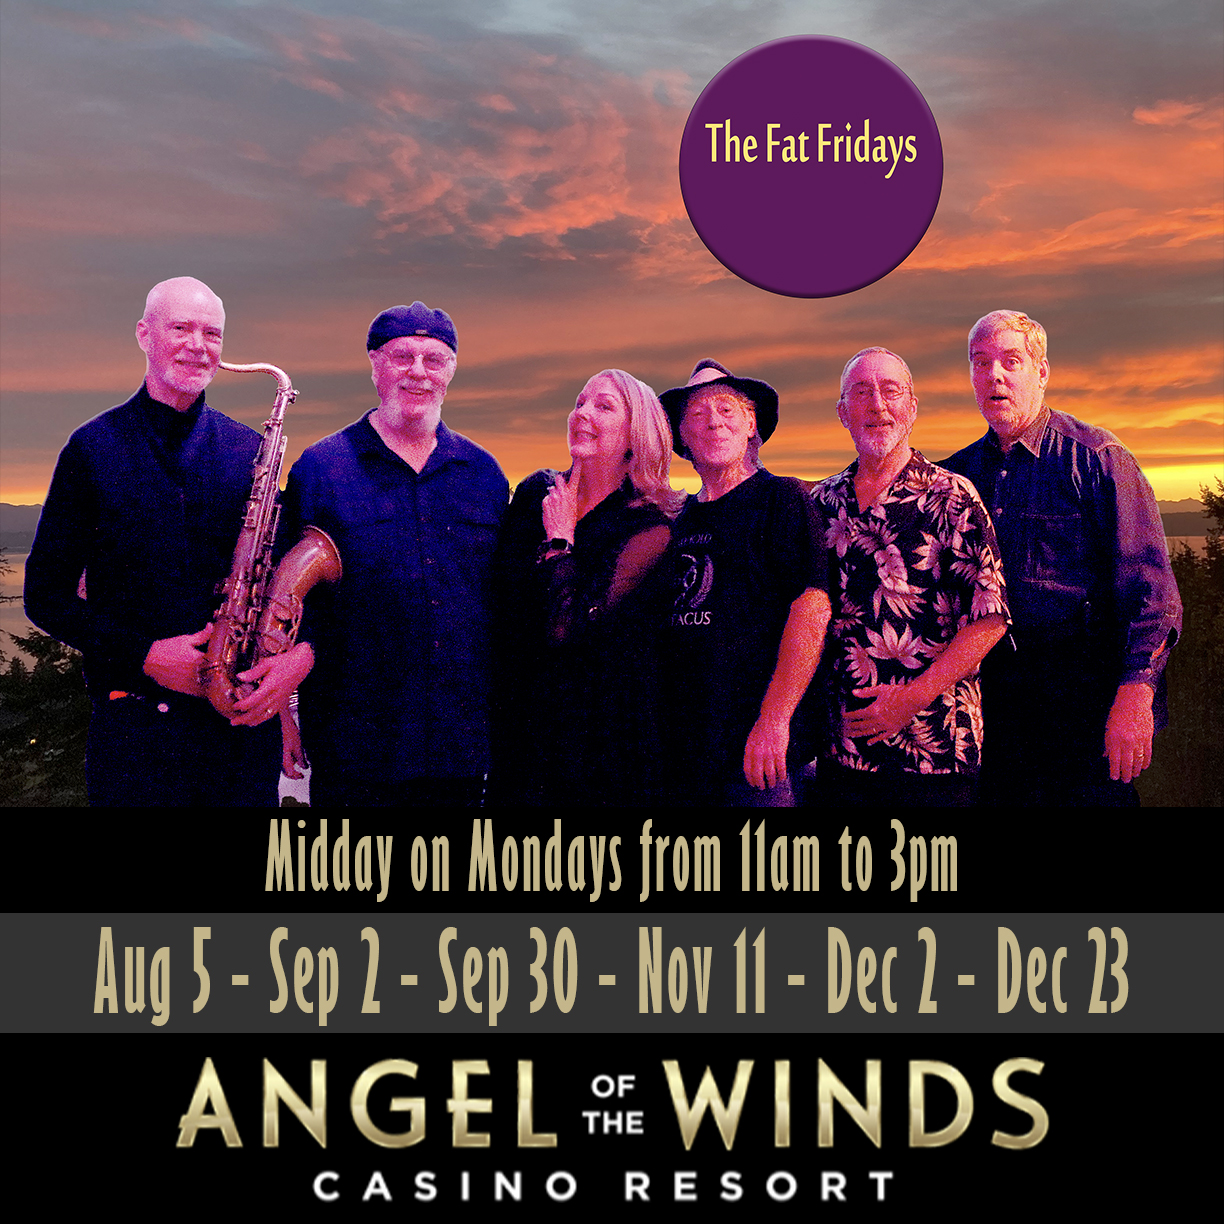 The Fat Fridays at Angel of the Winds